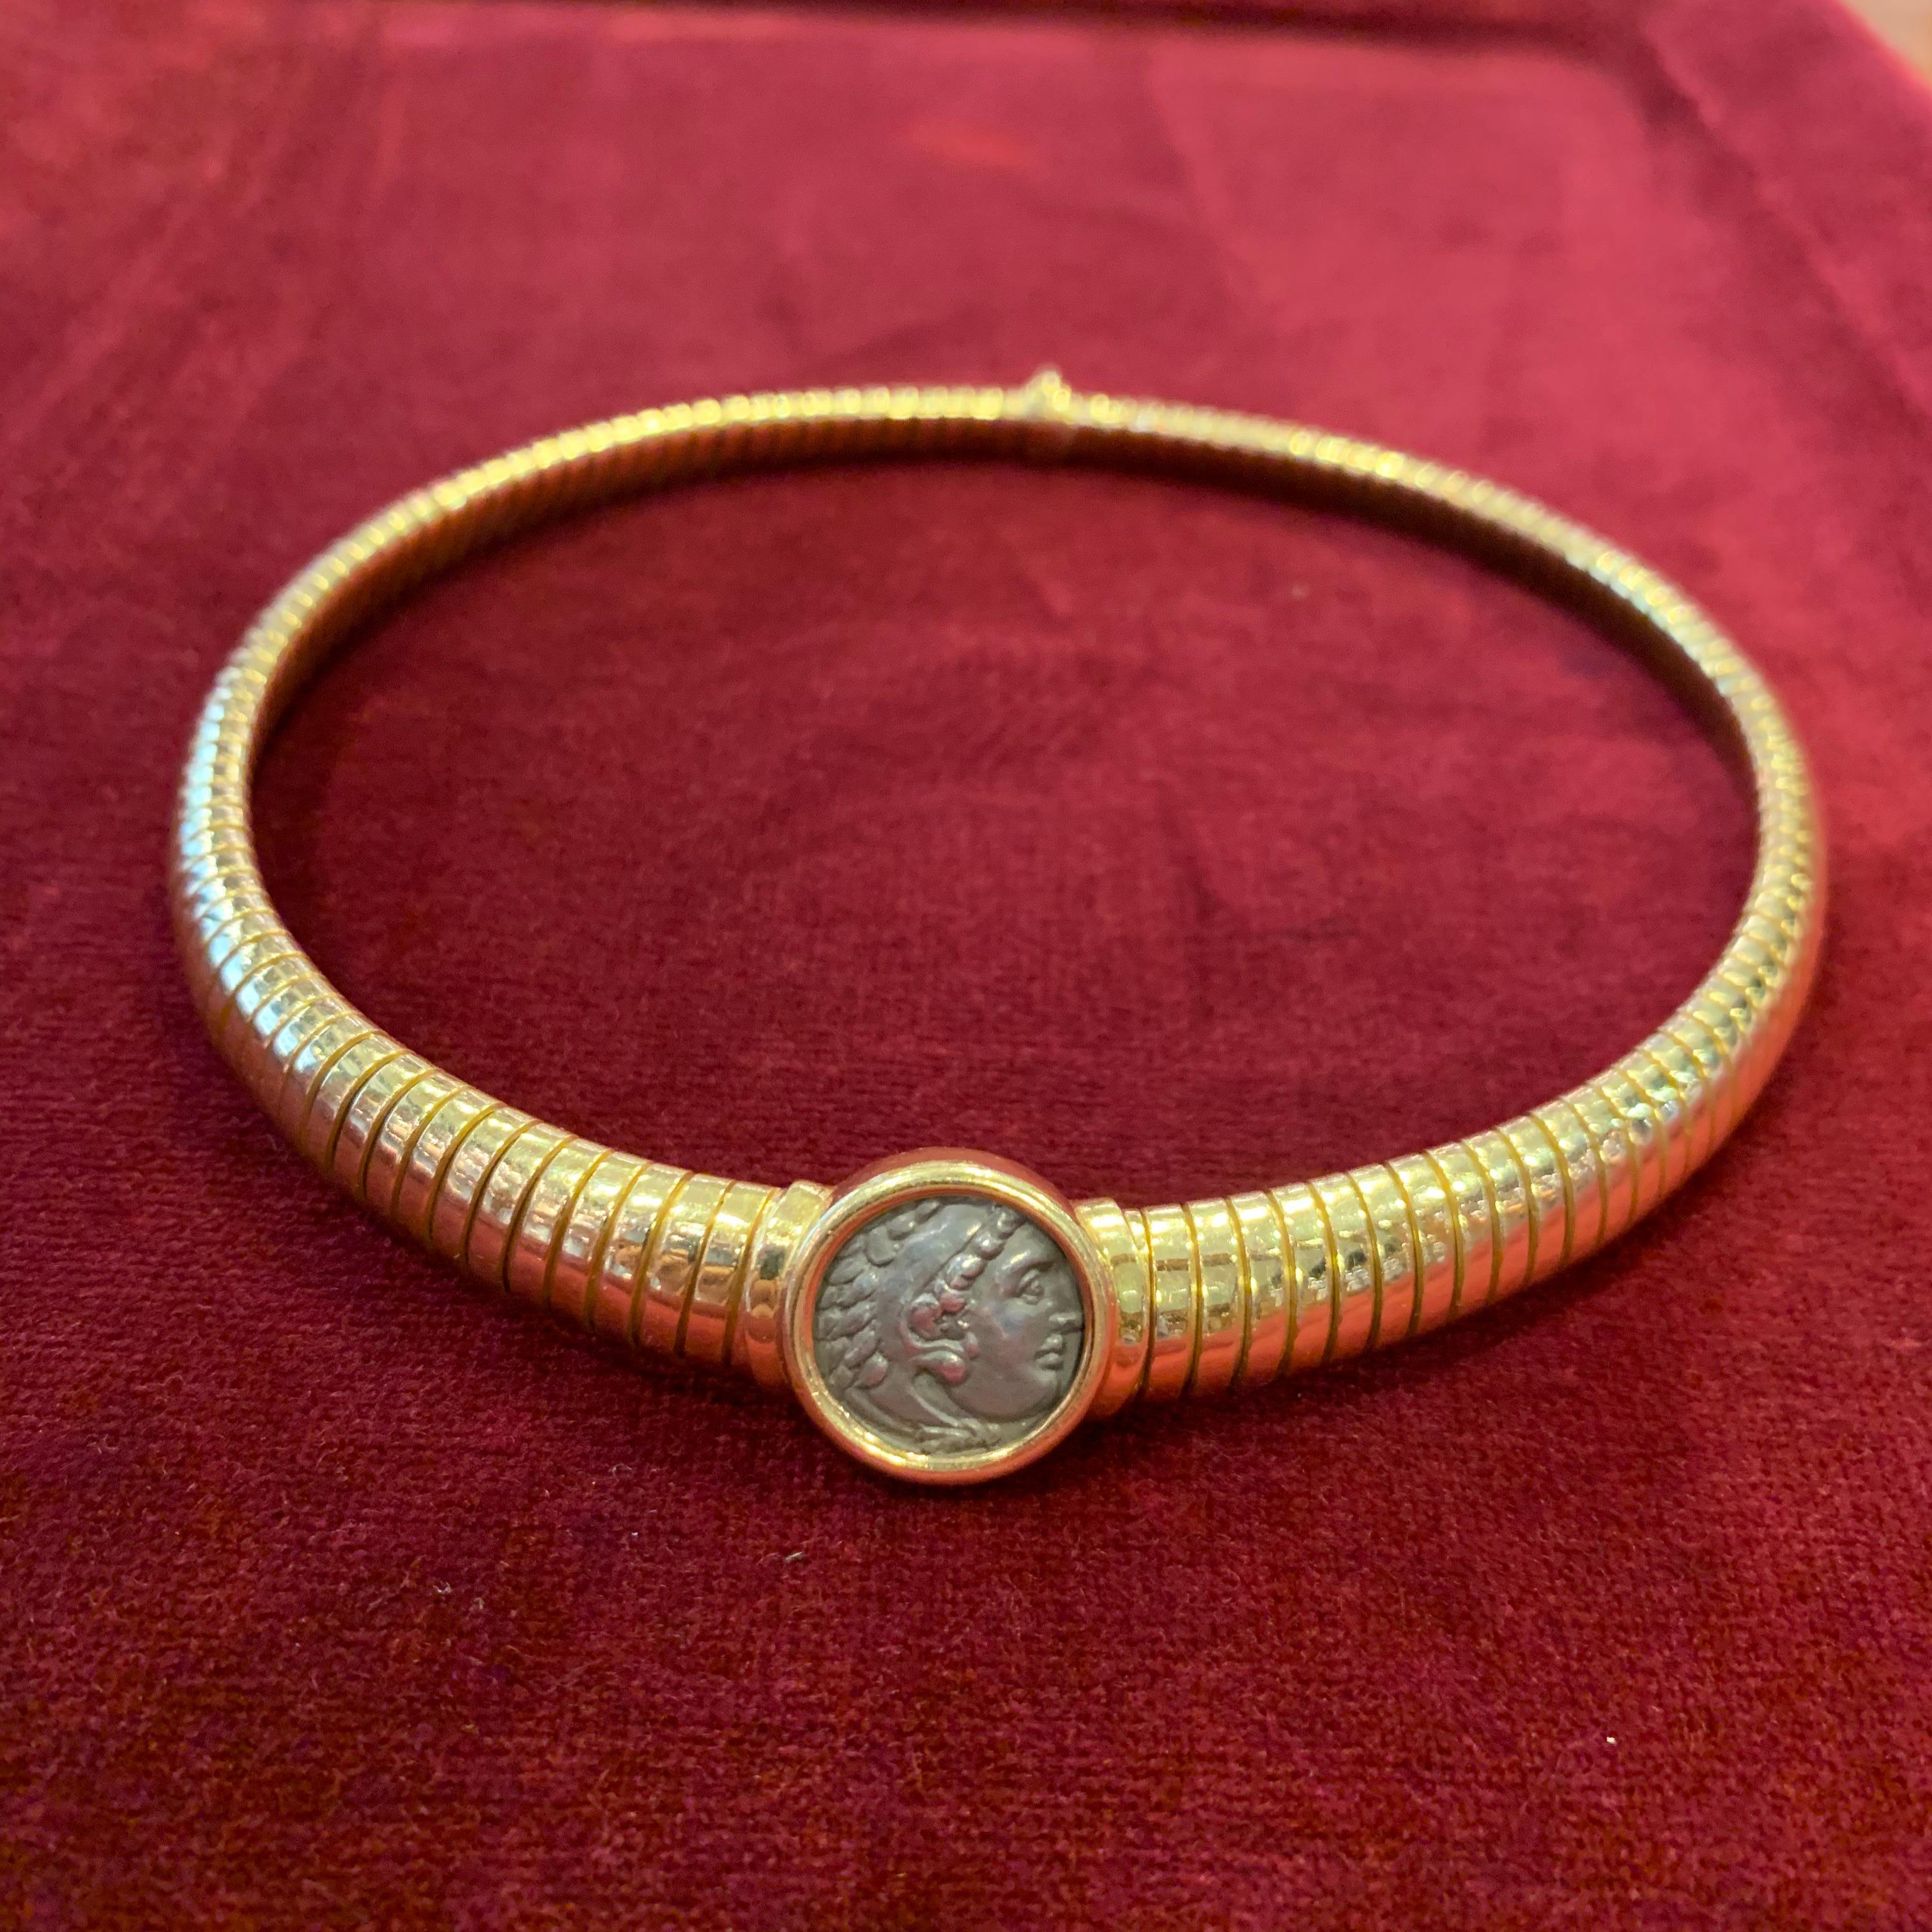 An iconic Bulgari “Monete” tubogas necklace consisting of 18kt yellow gold and an antique Roman coin. Made in Italy, circa 1975.